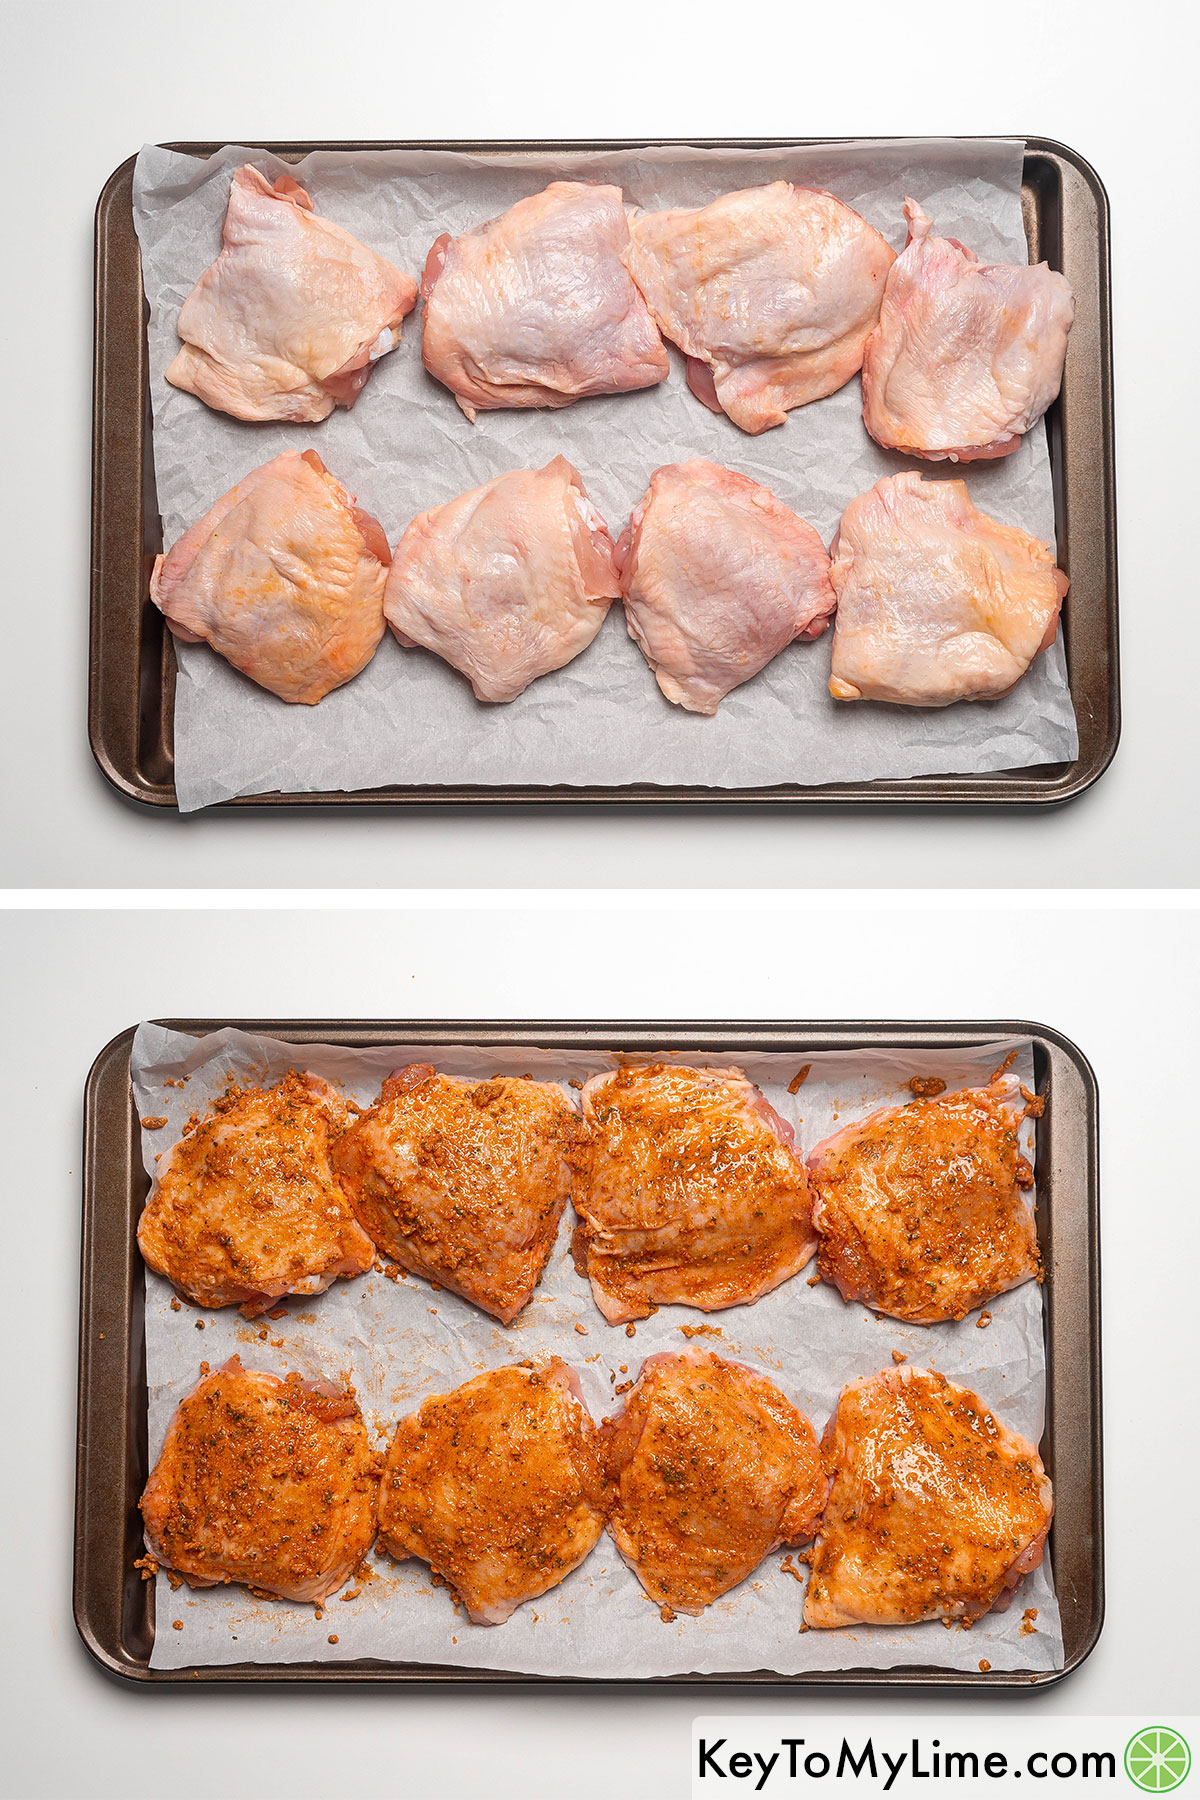 Placing the raw chicken thighs on a lined backing cheese and brushing on the homemade ranch dressing.